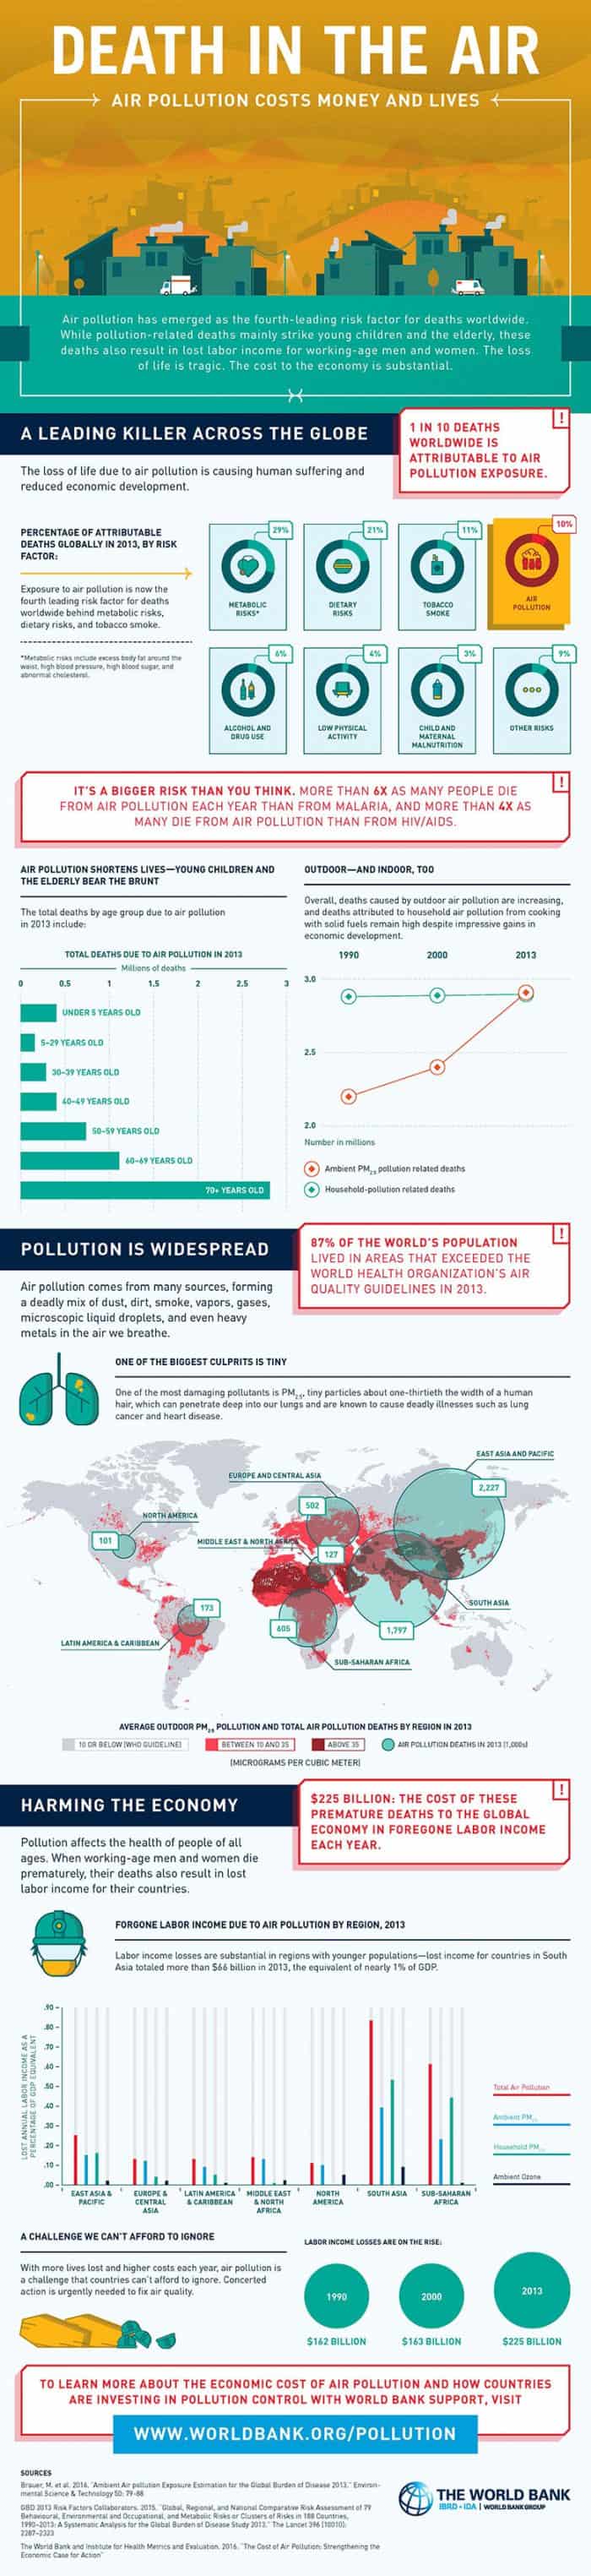 Infographic showing how air pollution affects our health and our economy.